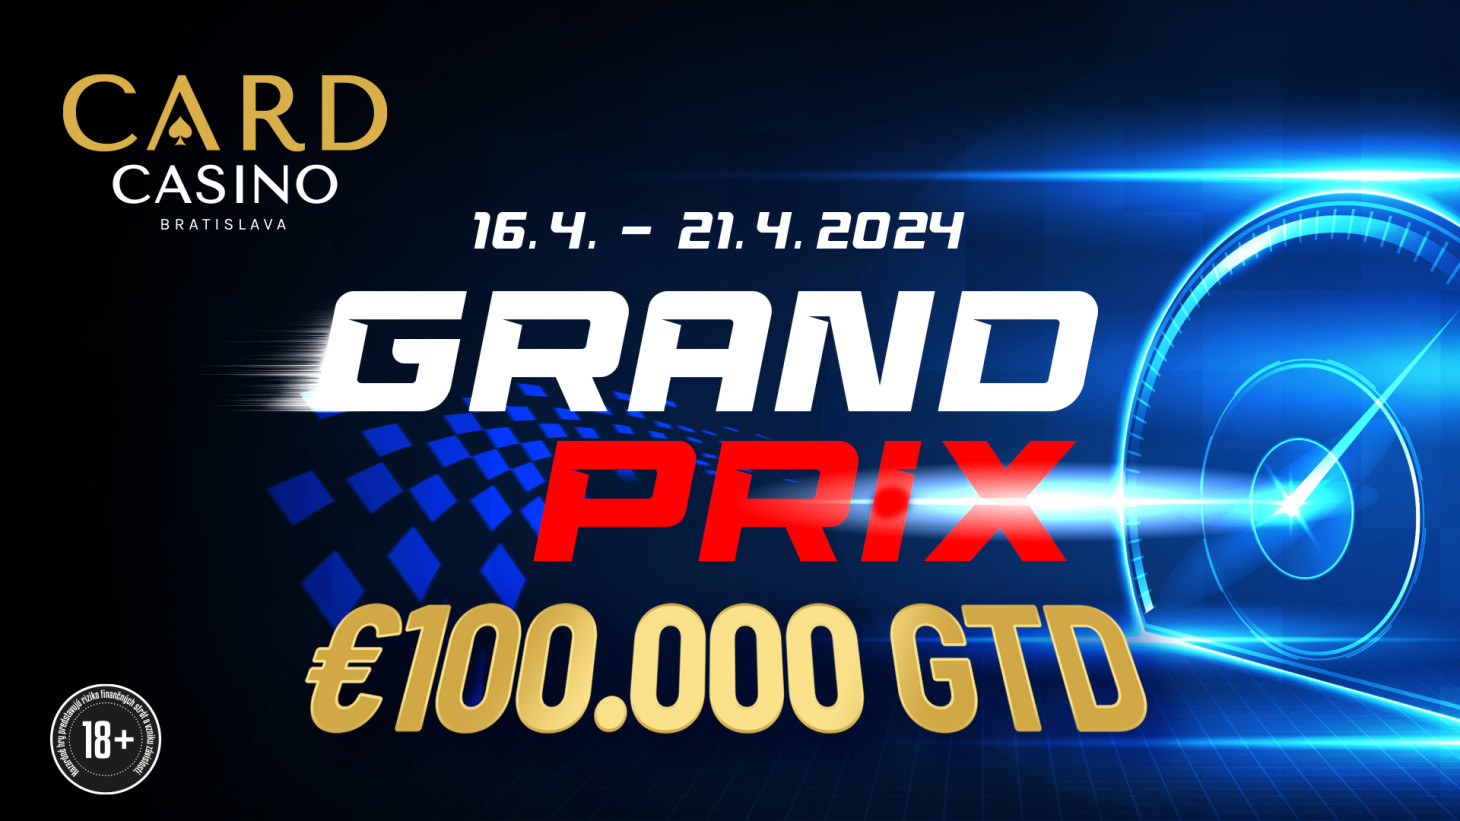 The WPT is over and the Grand Prix begins. €100,000 GTD tournament